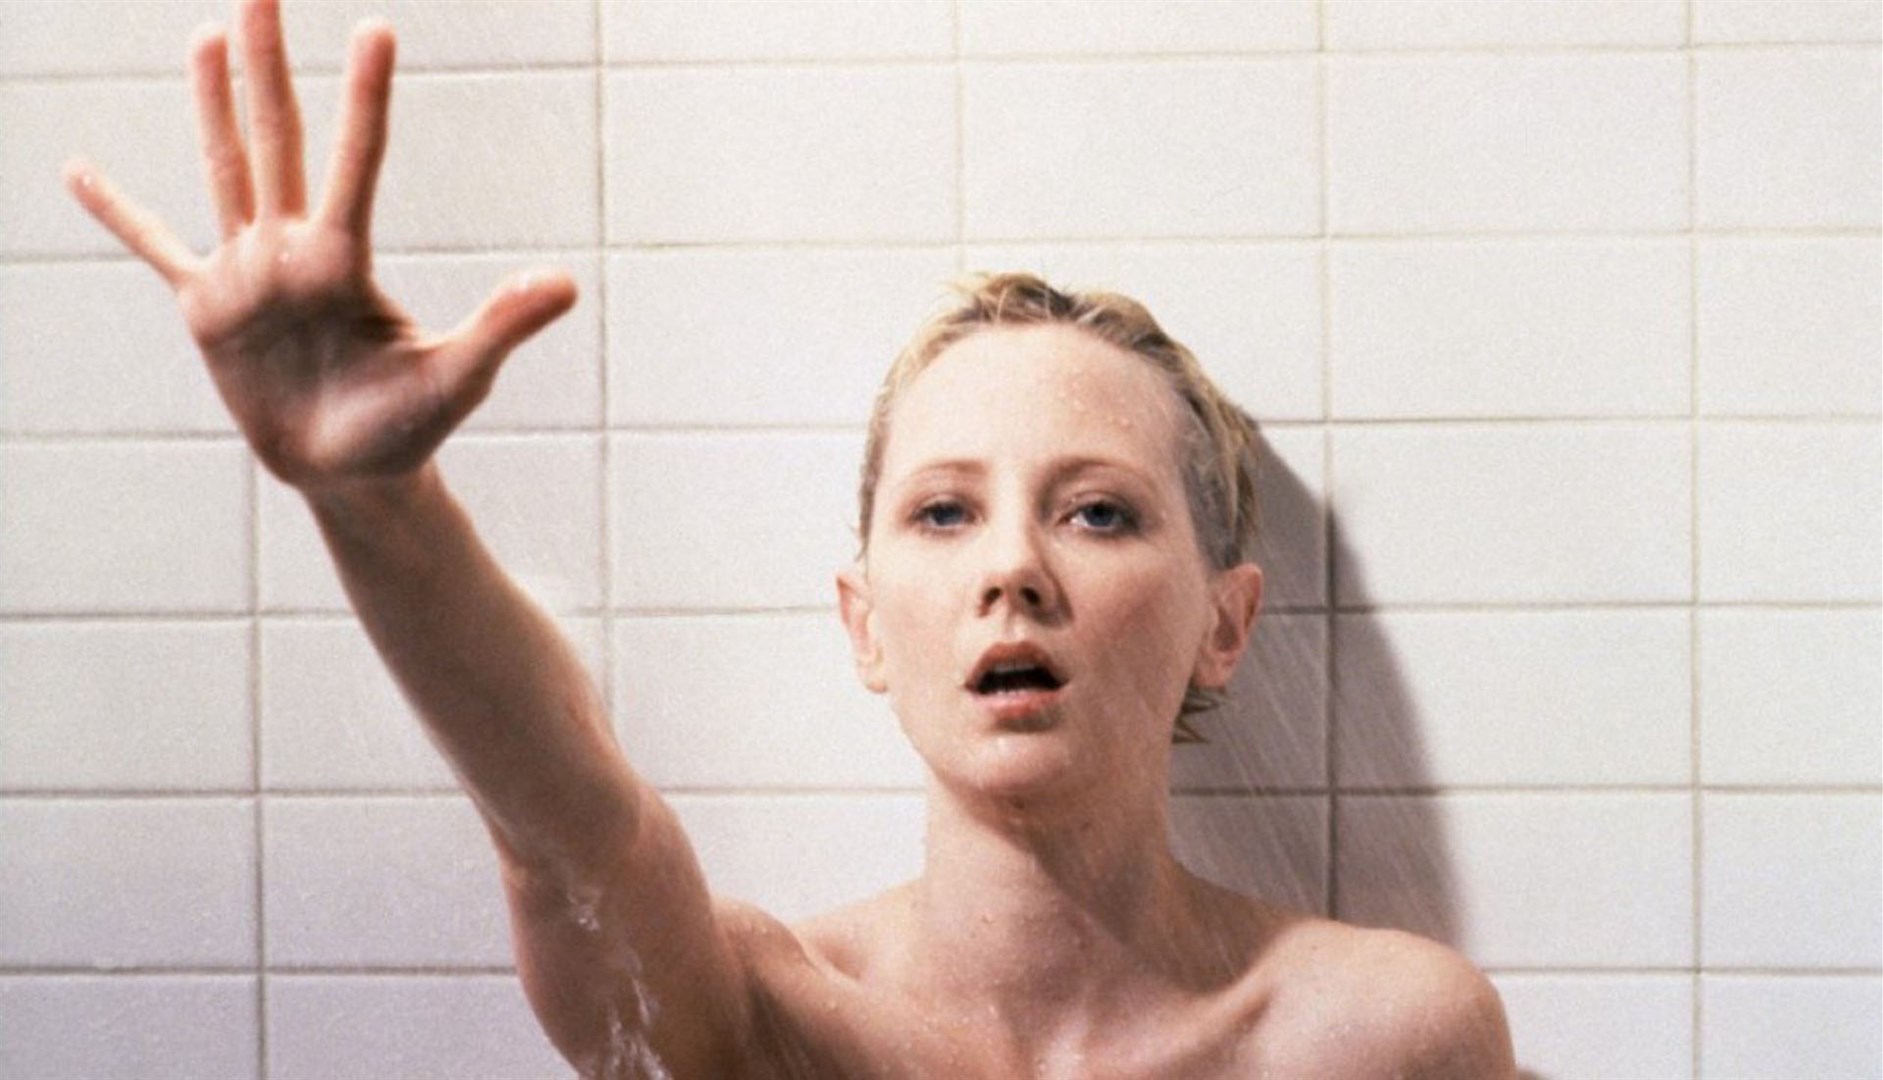 Anne Heche as Marion Crane in the replication of the famous shower scene in Psycho (1998)